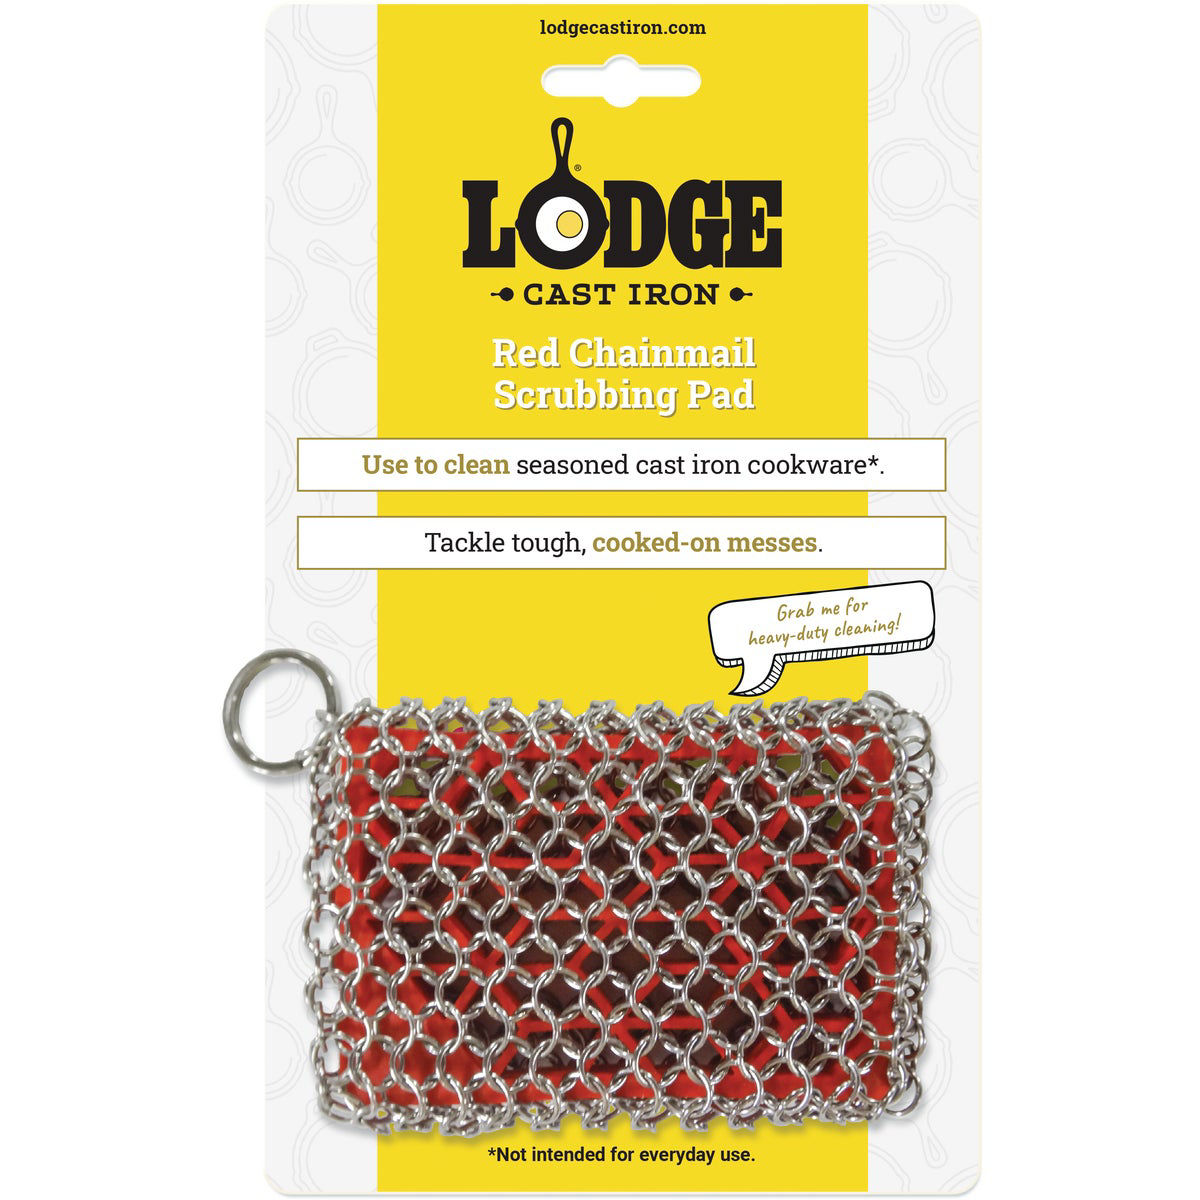 Chainmail Scrubbing Pad, Shop Online